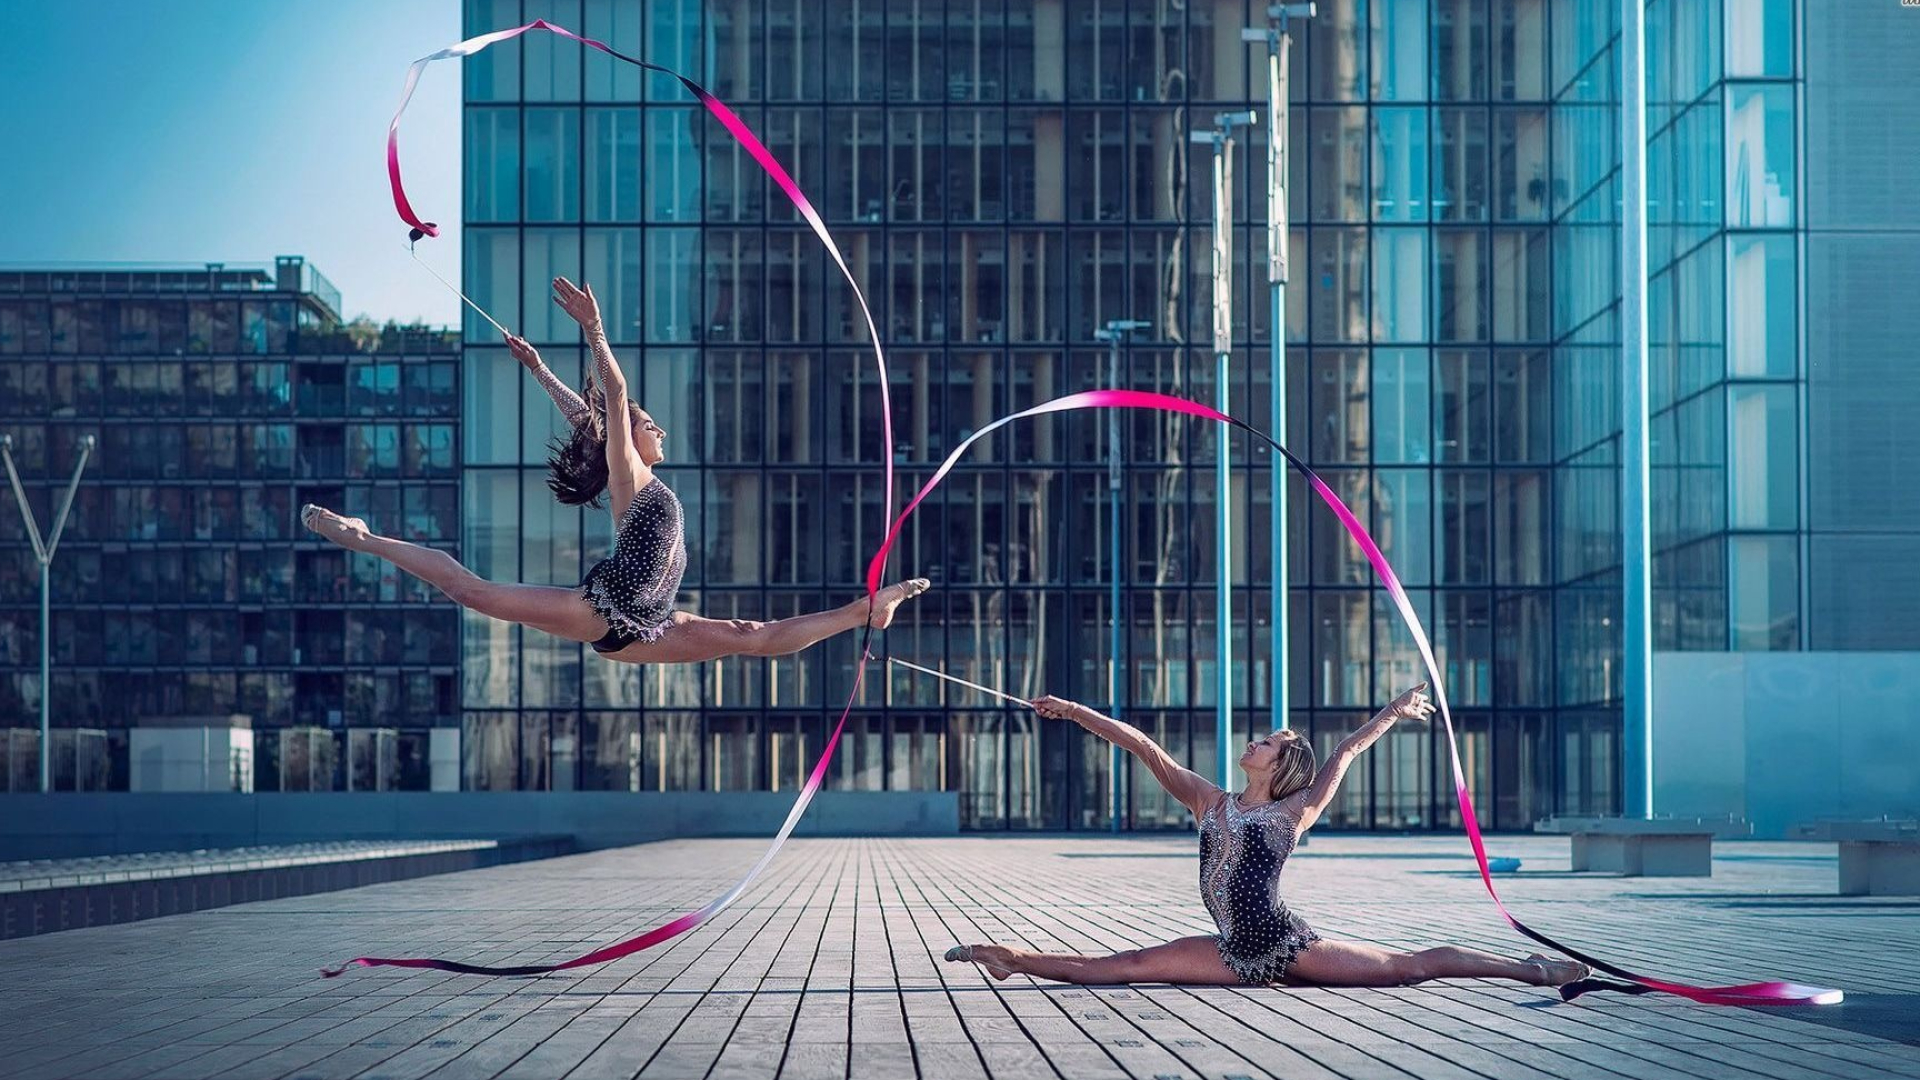 Rhythmic Gymnastics: Outdoor artistic performance by professional gymnasts, Competitive sports and choreography. 1920x1080 Full HD Background.